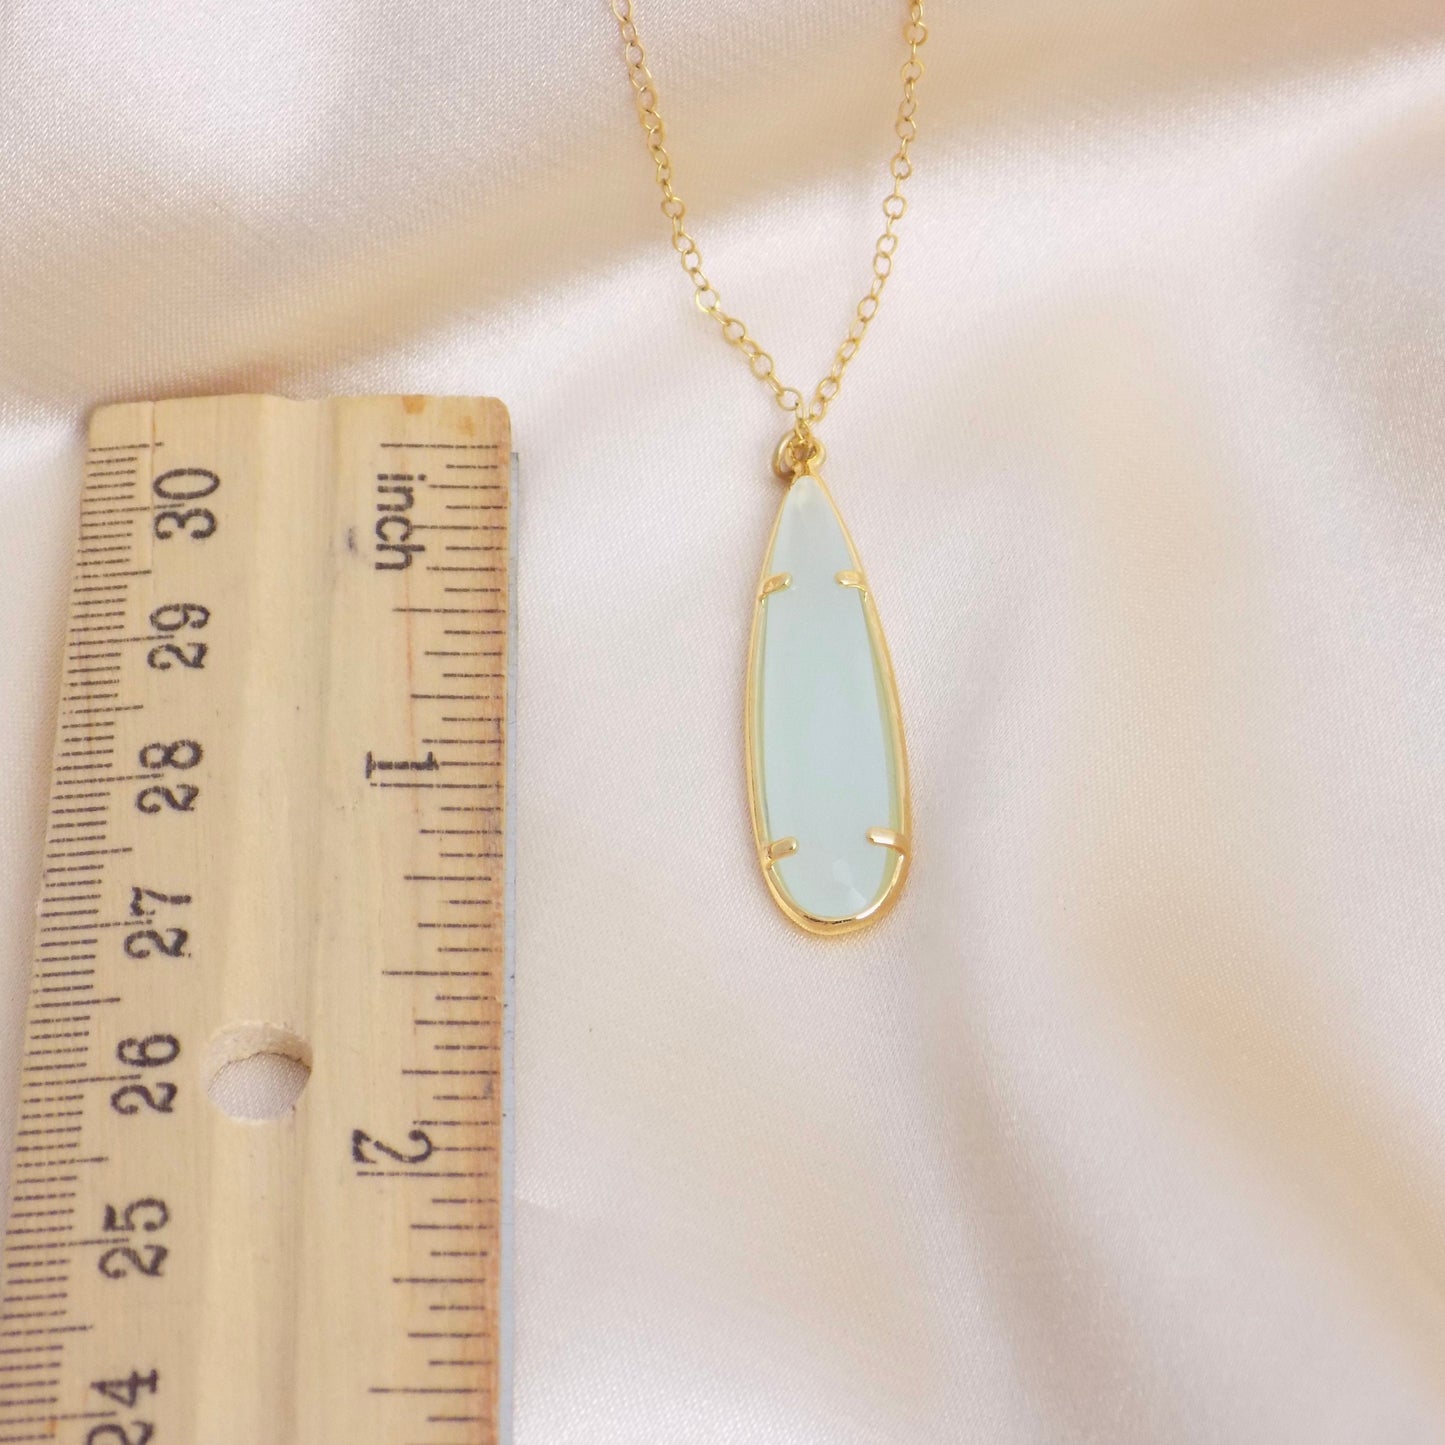 Aqua Chalcedony Gemstone Necklace Gold, Sea Foam Chalcedony Pendant, Christmas Gifts For Her, M6-122